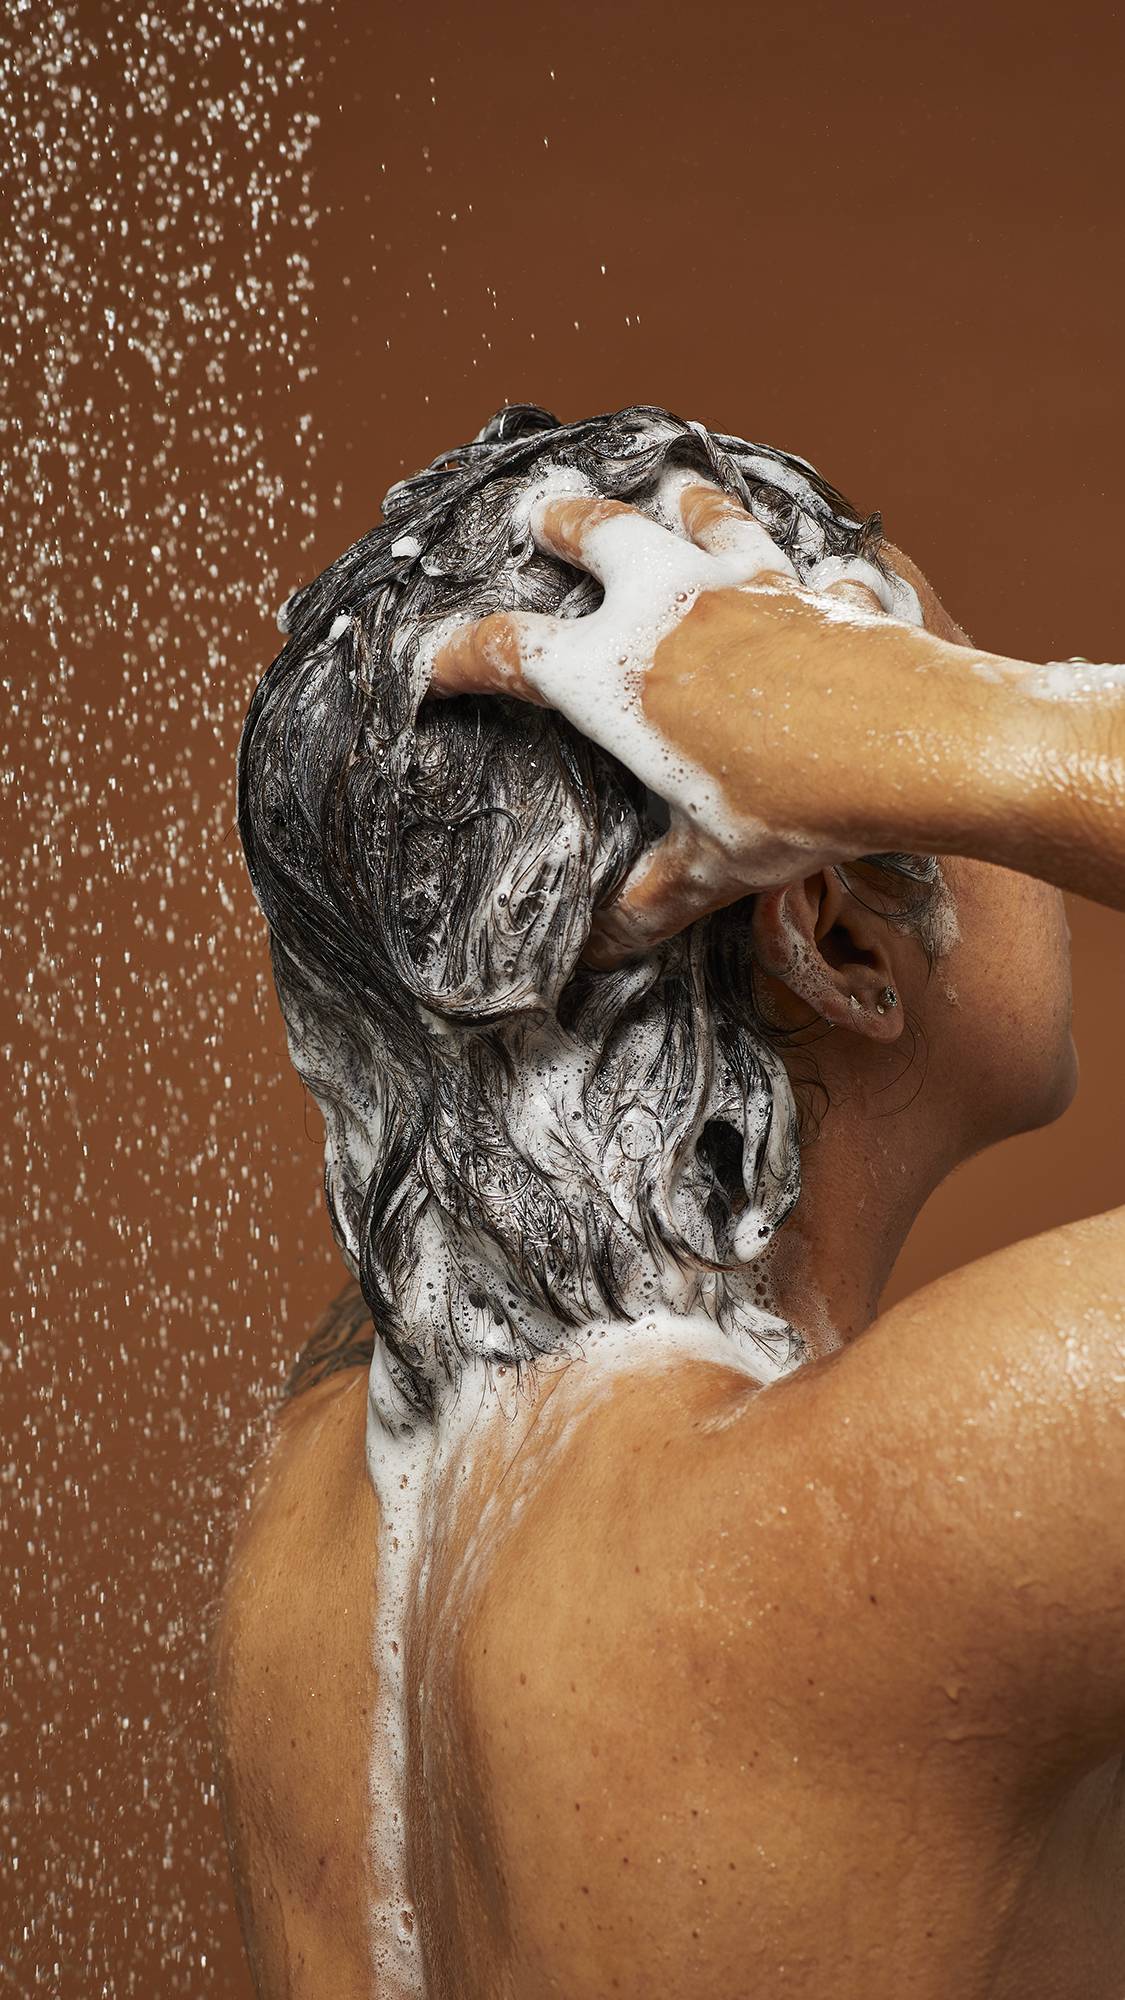 Model is standing under shower water lathering up the shampoo as it falls down their back on a deep earth-tone background.